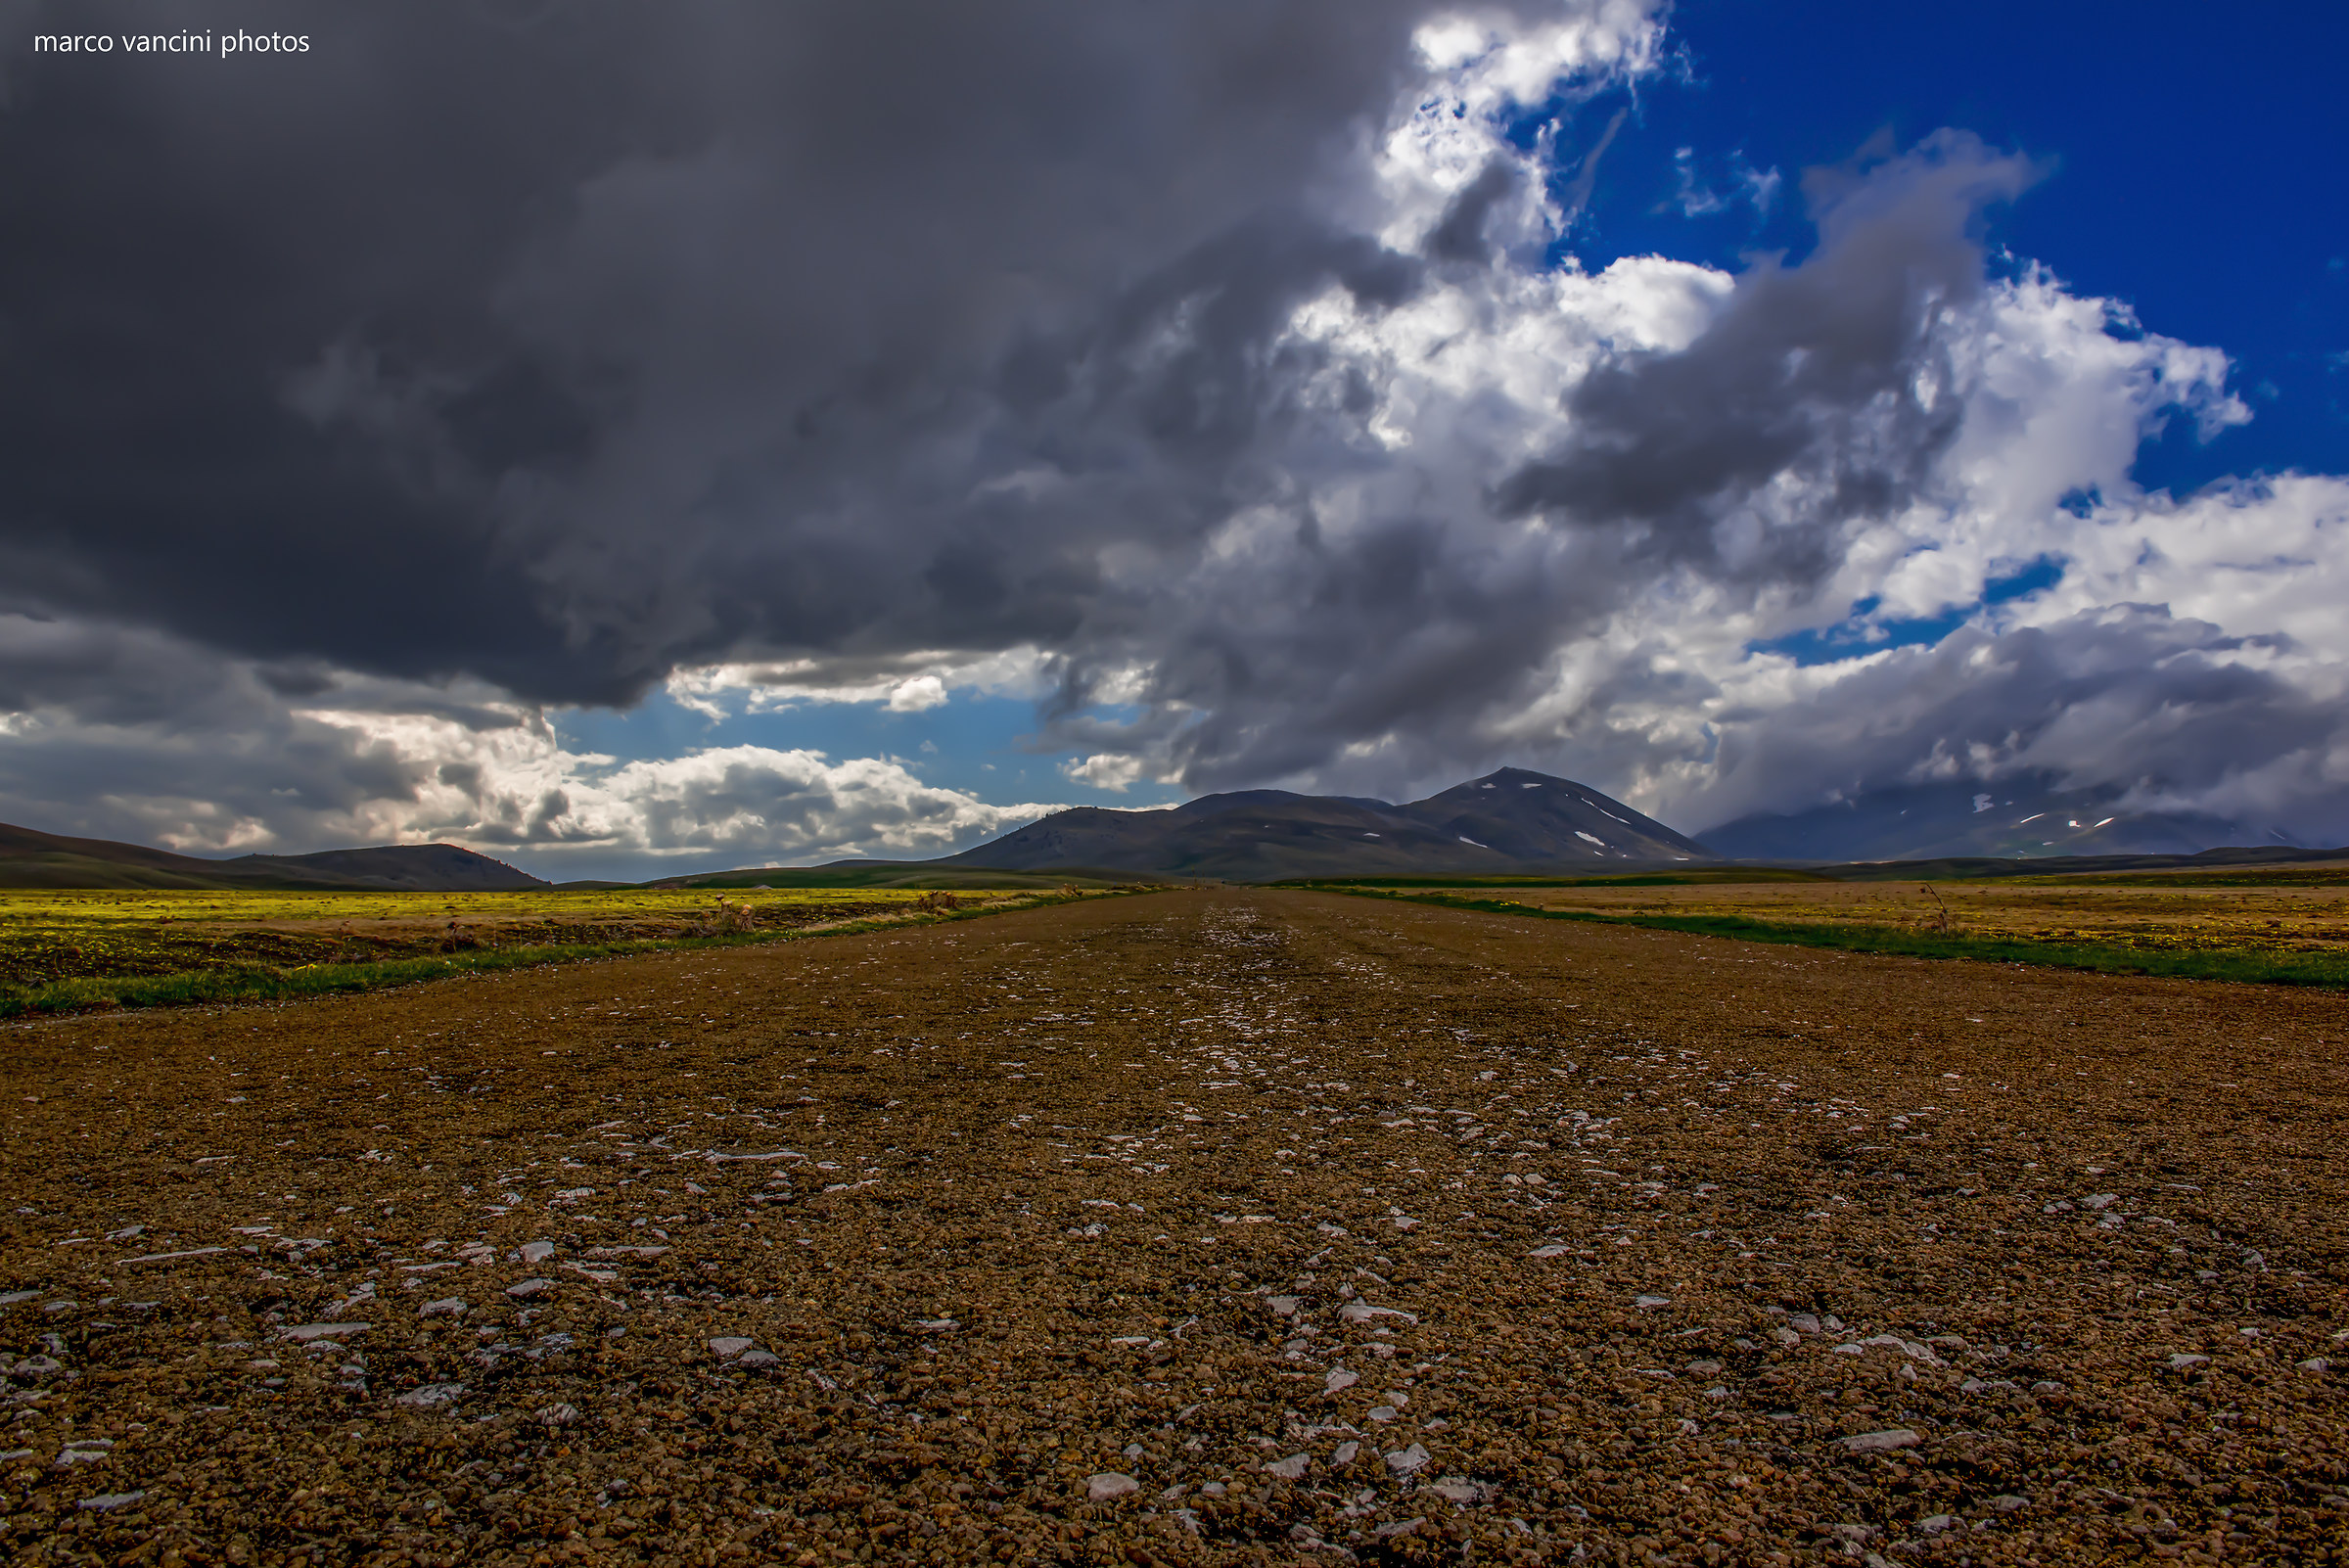 On the road of Campo Imperatore...